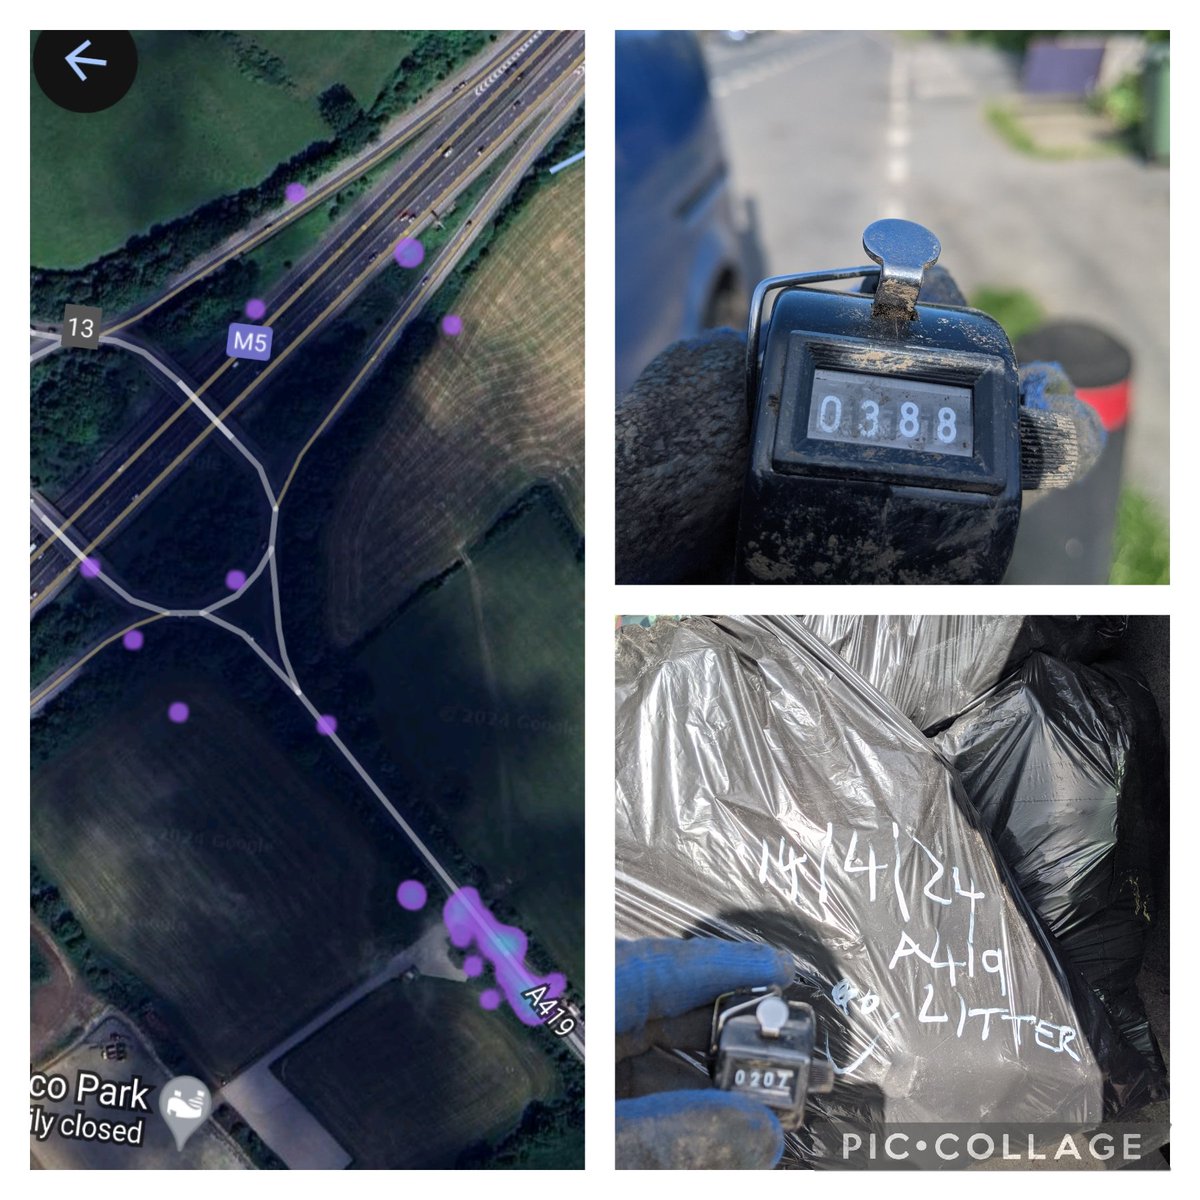 Round up day. With monthly lay-by #litter pick numbers in. In the last 4 months ~24,000 items recovered from the A38 & A419. As a solo picker it's only snapshot for others to use @StroudDC @KeepBritainTidy @cleanupbritain @Siobhan_Baillie @MinchChloe @kimleadbeater @TruckersUp